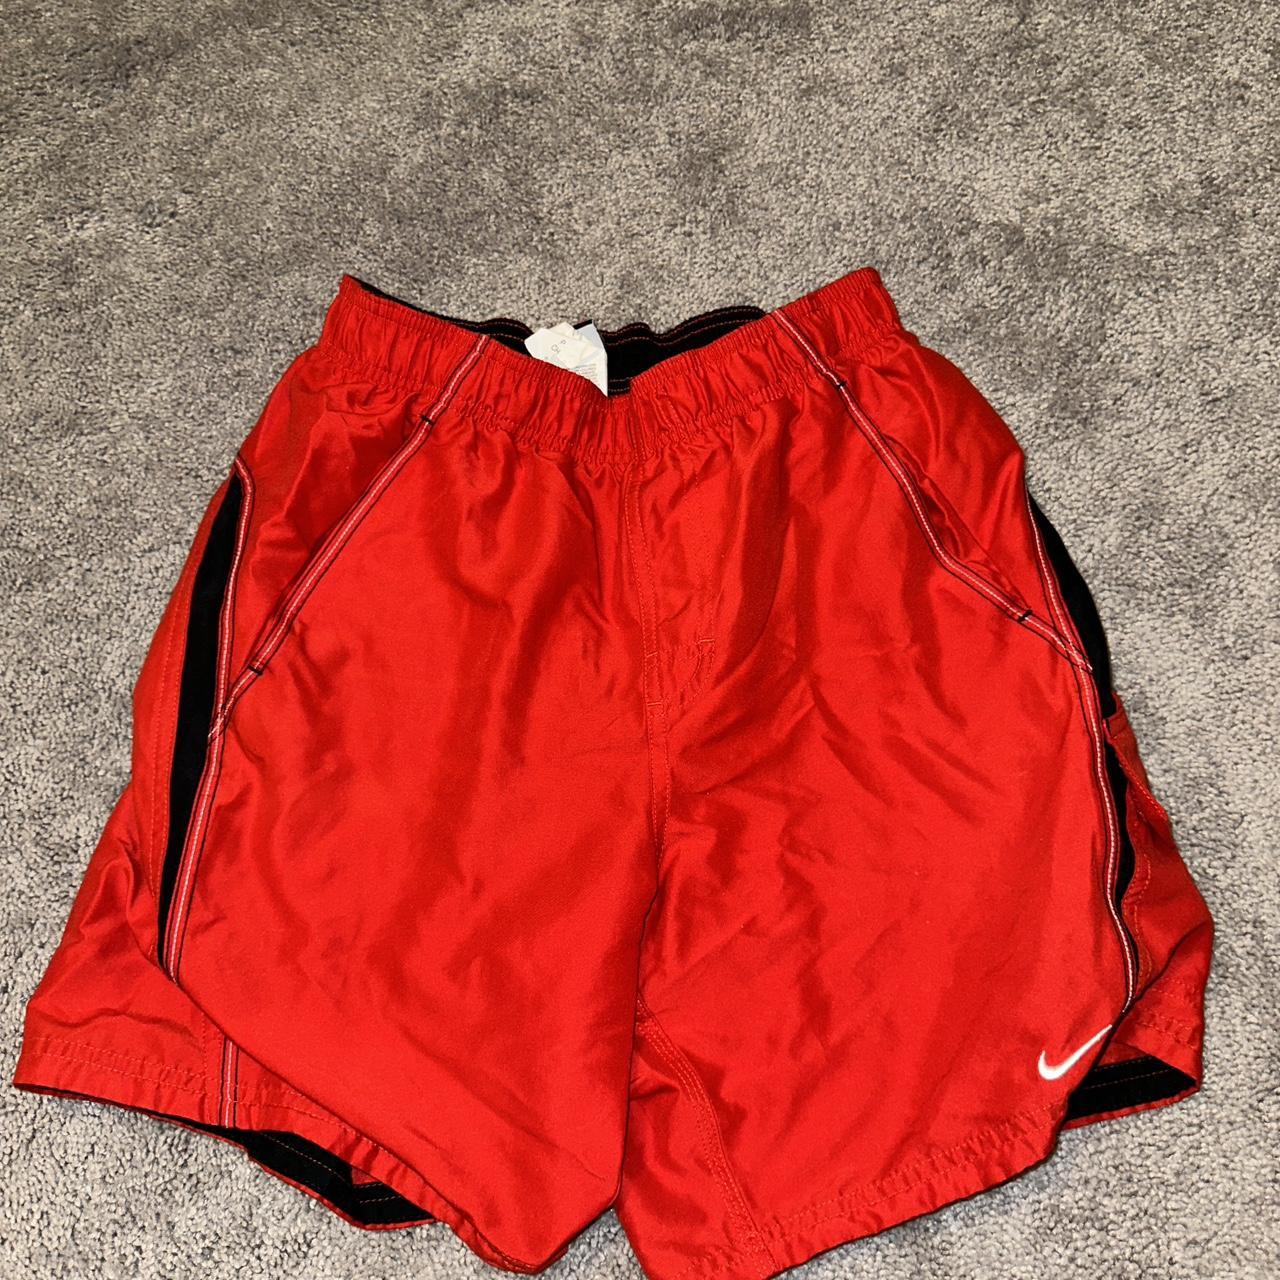 Red Nike Bathing suit Size: Small #nike - Depop